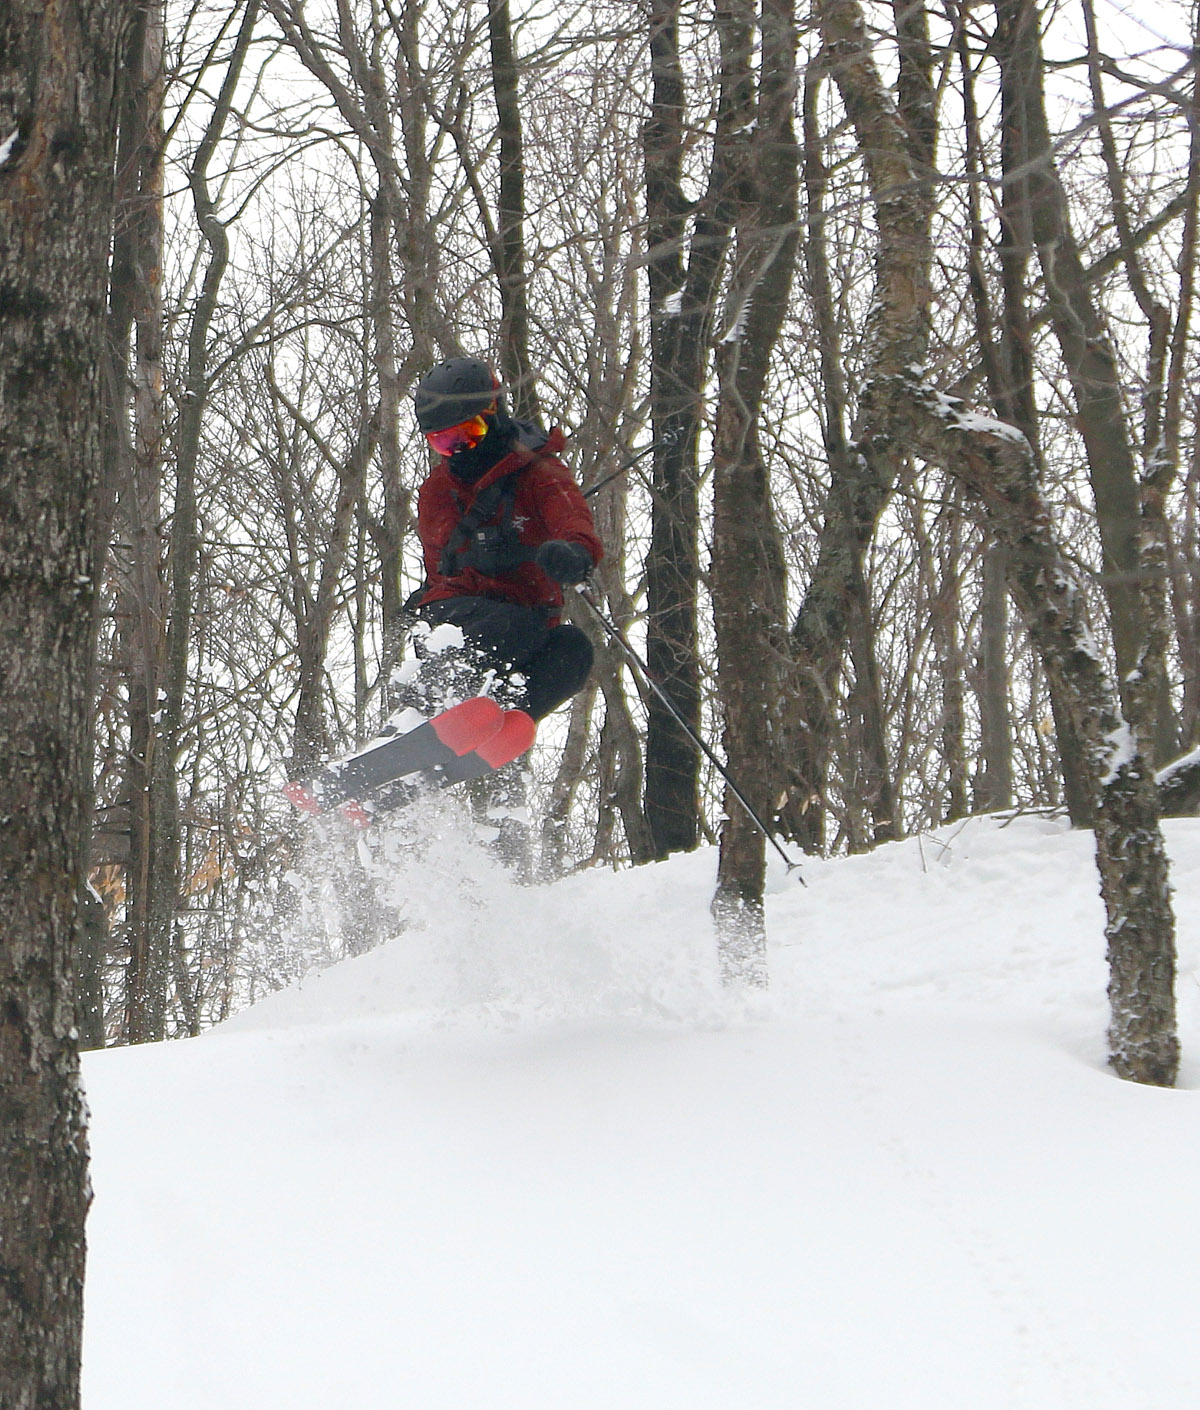 An image of Dylan jumping in powder snow from Winter Storm Quest at Bolton Valley Ski Resort in Vermont